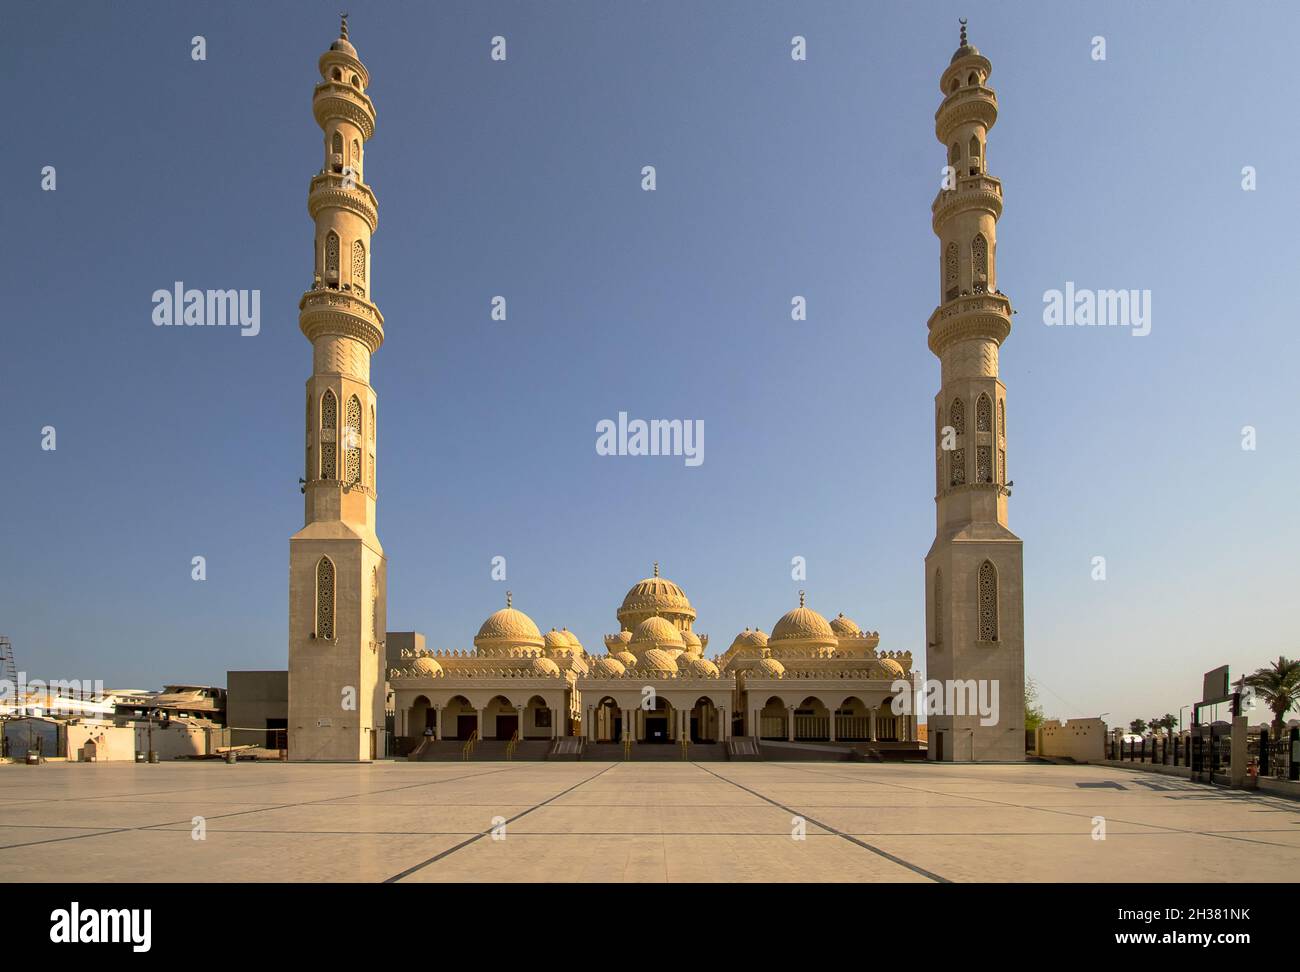 The Al Mina Mosque in the city of Hurghada in Egypt Stock Photo